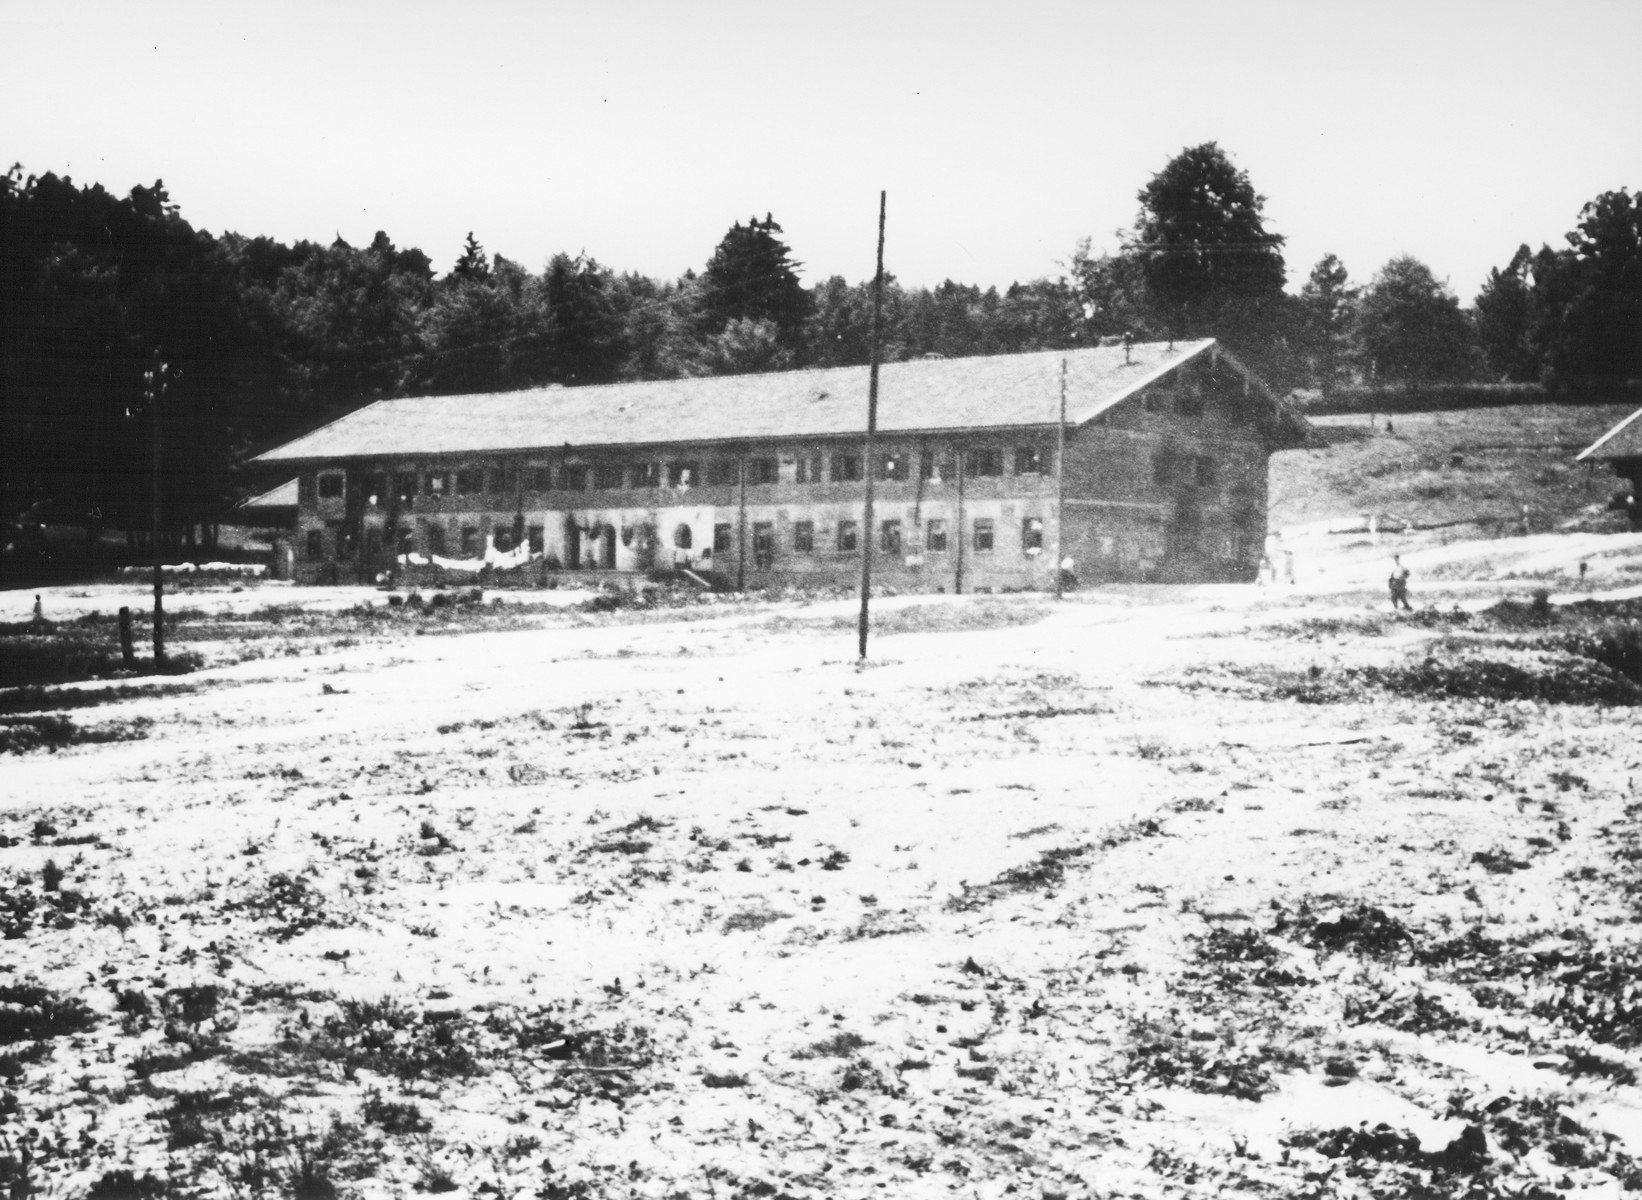 Exterior view of the building which served as living quarters in the Feldafing DP camp.

The  building pictured is a "Sturmblockhaus," built in 1938 to house the Nationalsozialistische Deutsche Oberschule Starnberger See, established on the orders of SA-chief Ernst Roehm in 1934.  In April 1945, the school was dissolved and the building was repurposed to provide housing for displaced persons.